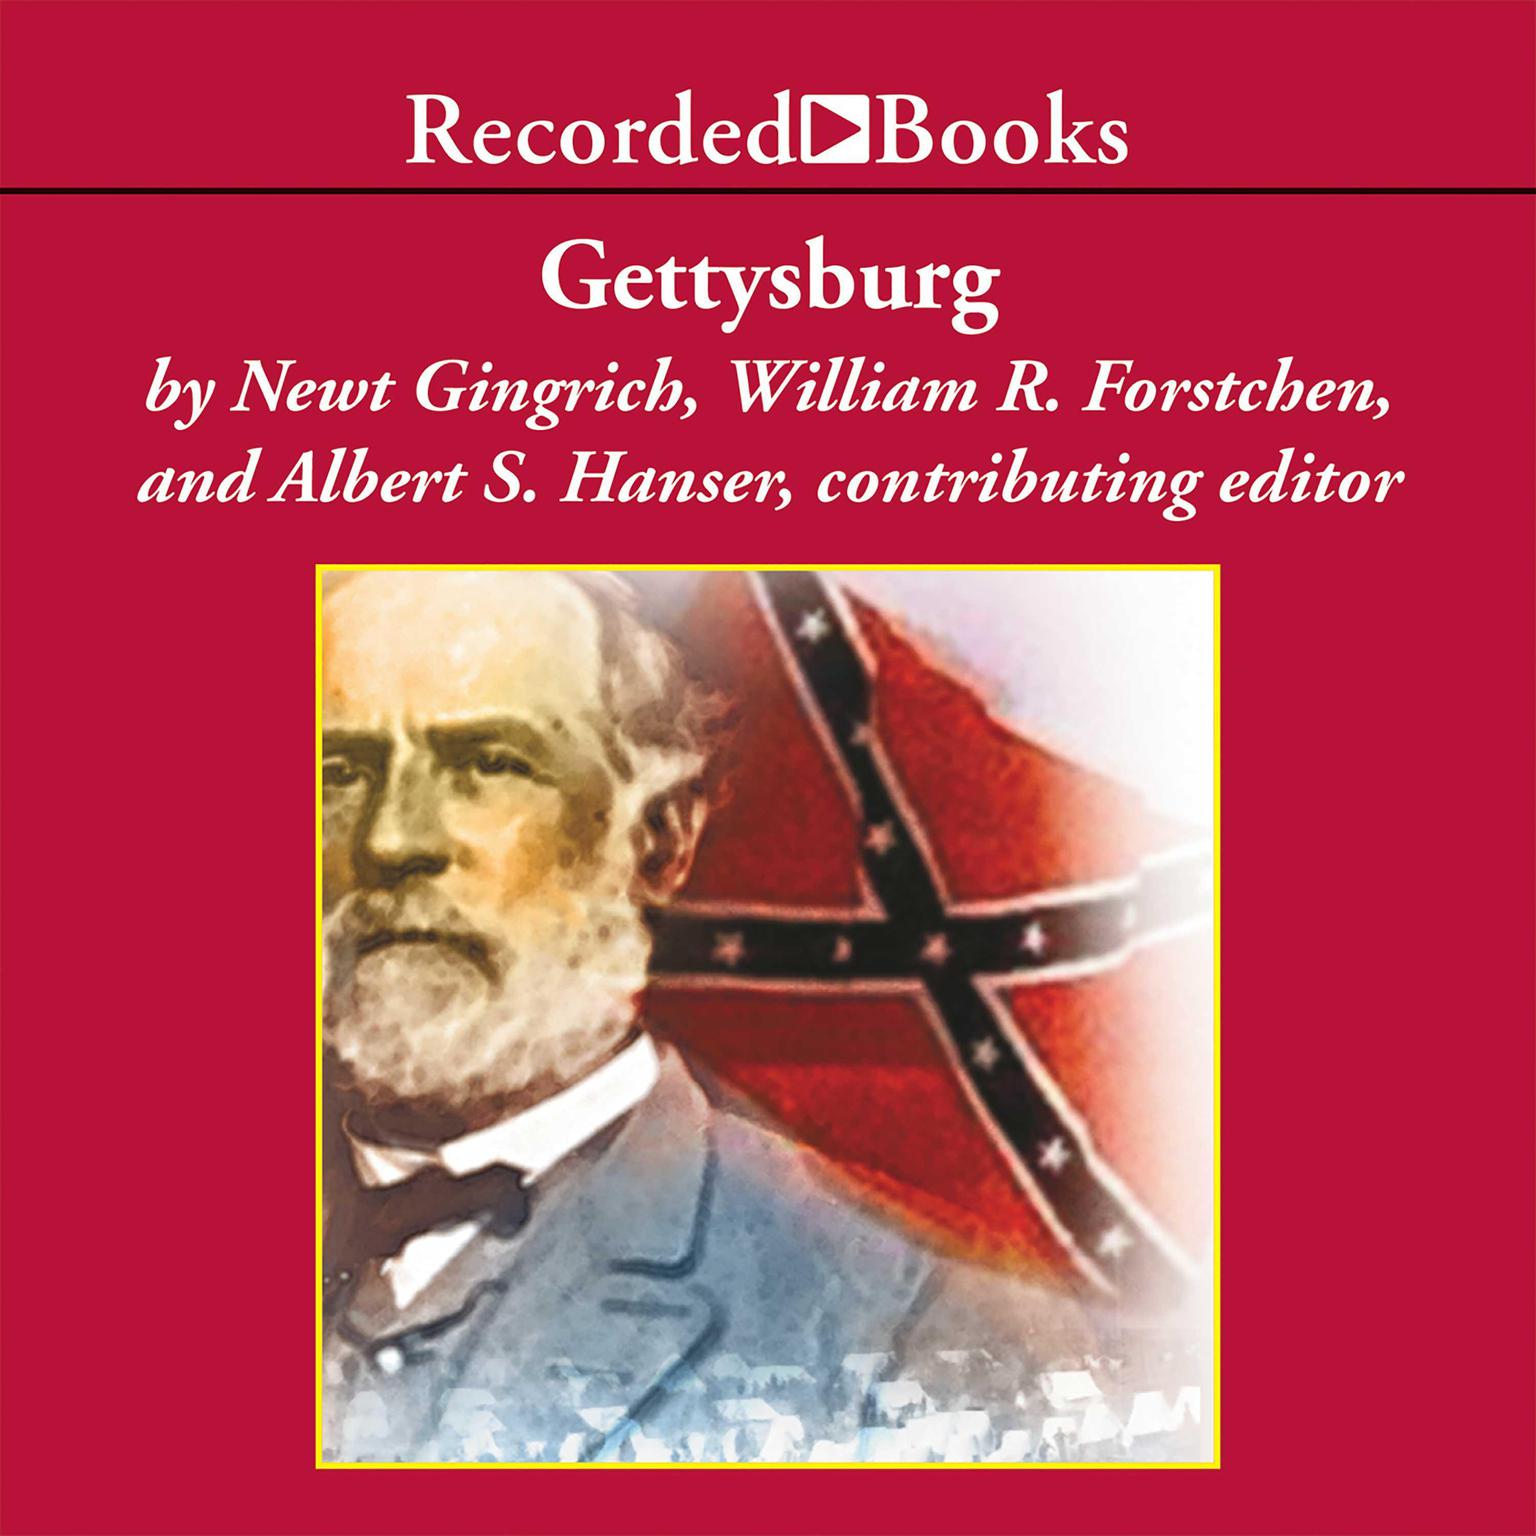 Gettysburg: A Novel of the Civil War Audiobook, by Newt Gingrich